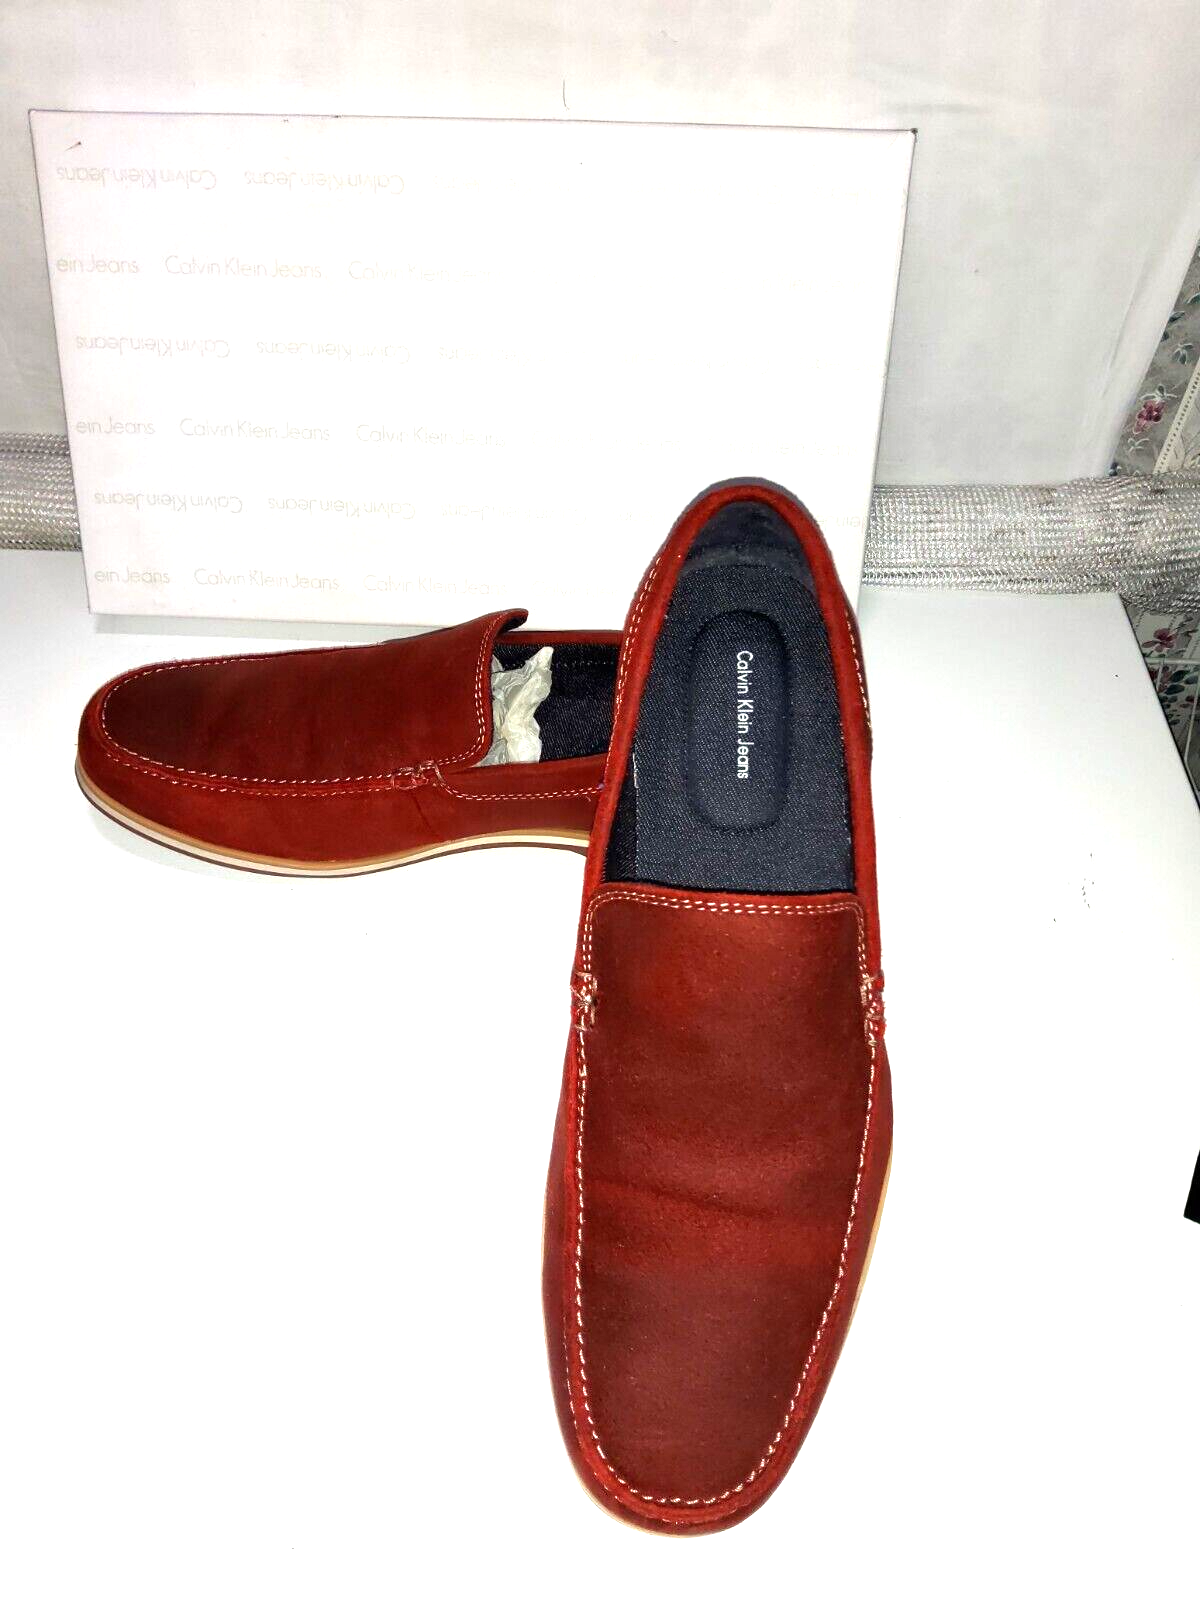 Primary image for Calvin Klein Jeans Mens Red Hammond Oily Suede 10 1/2-M Driving shoes New in Box